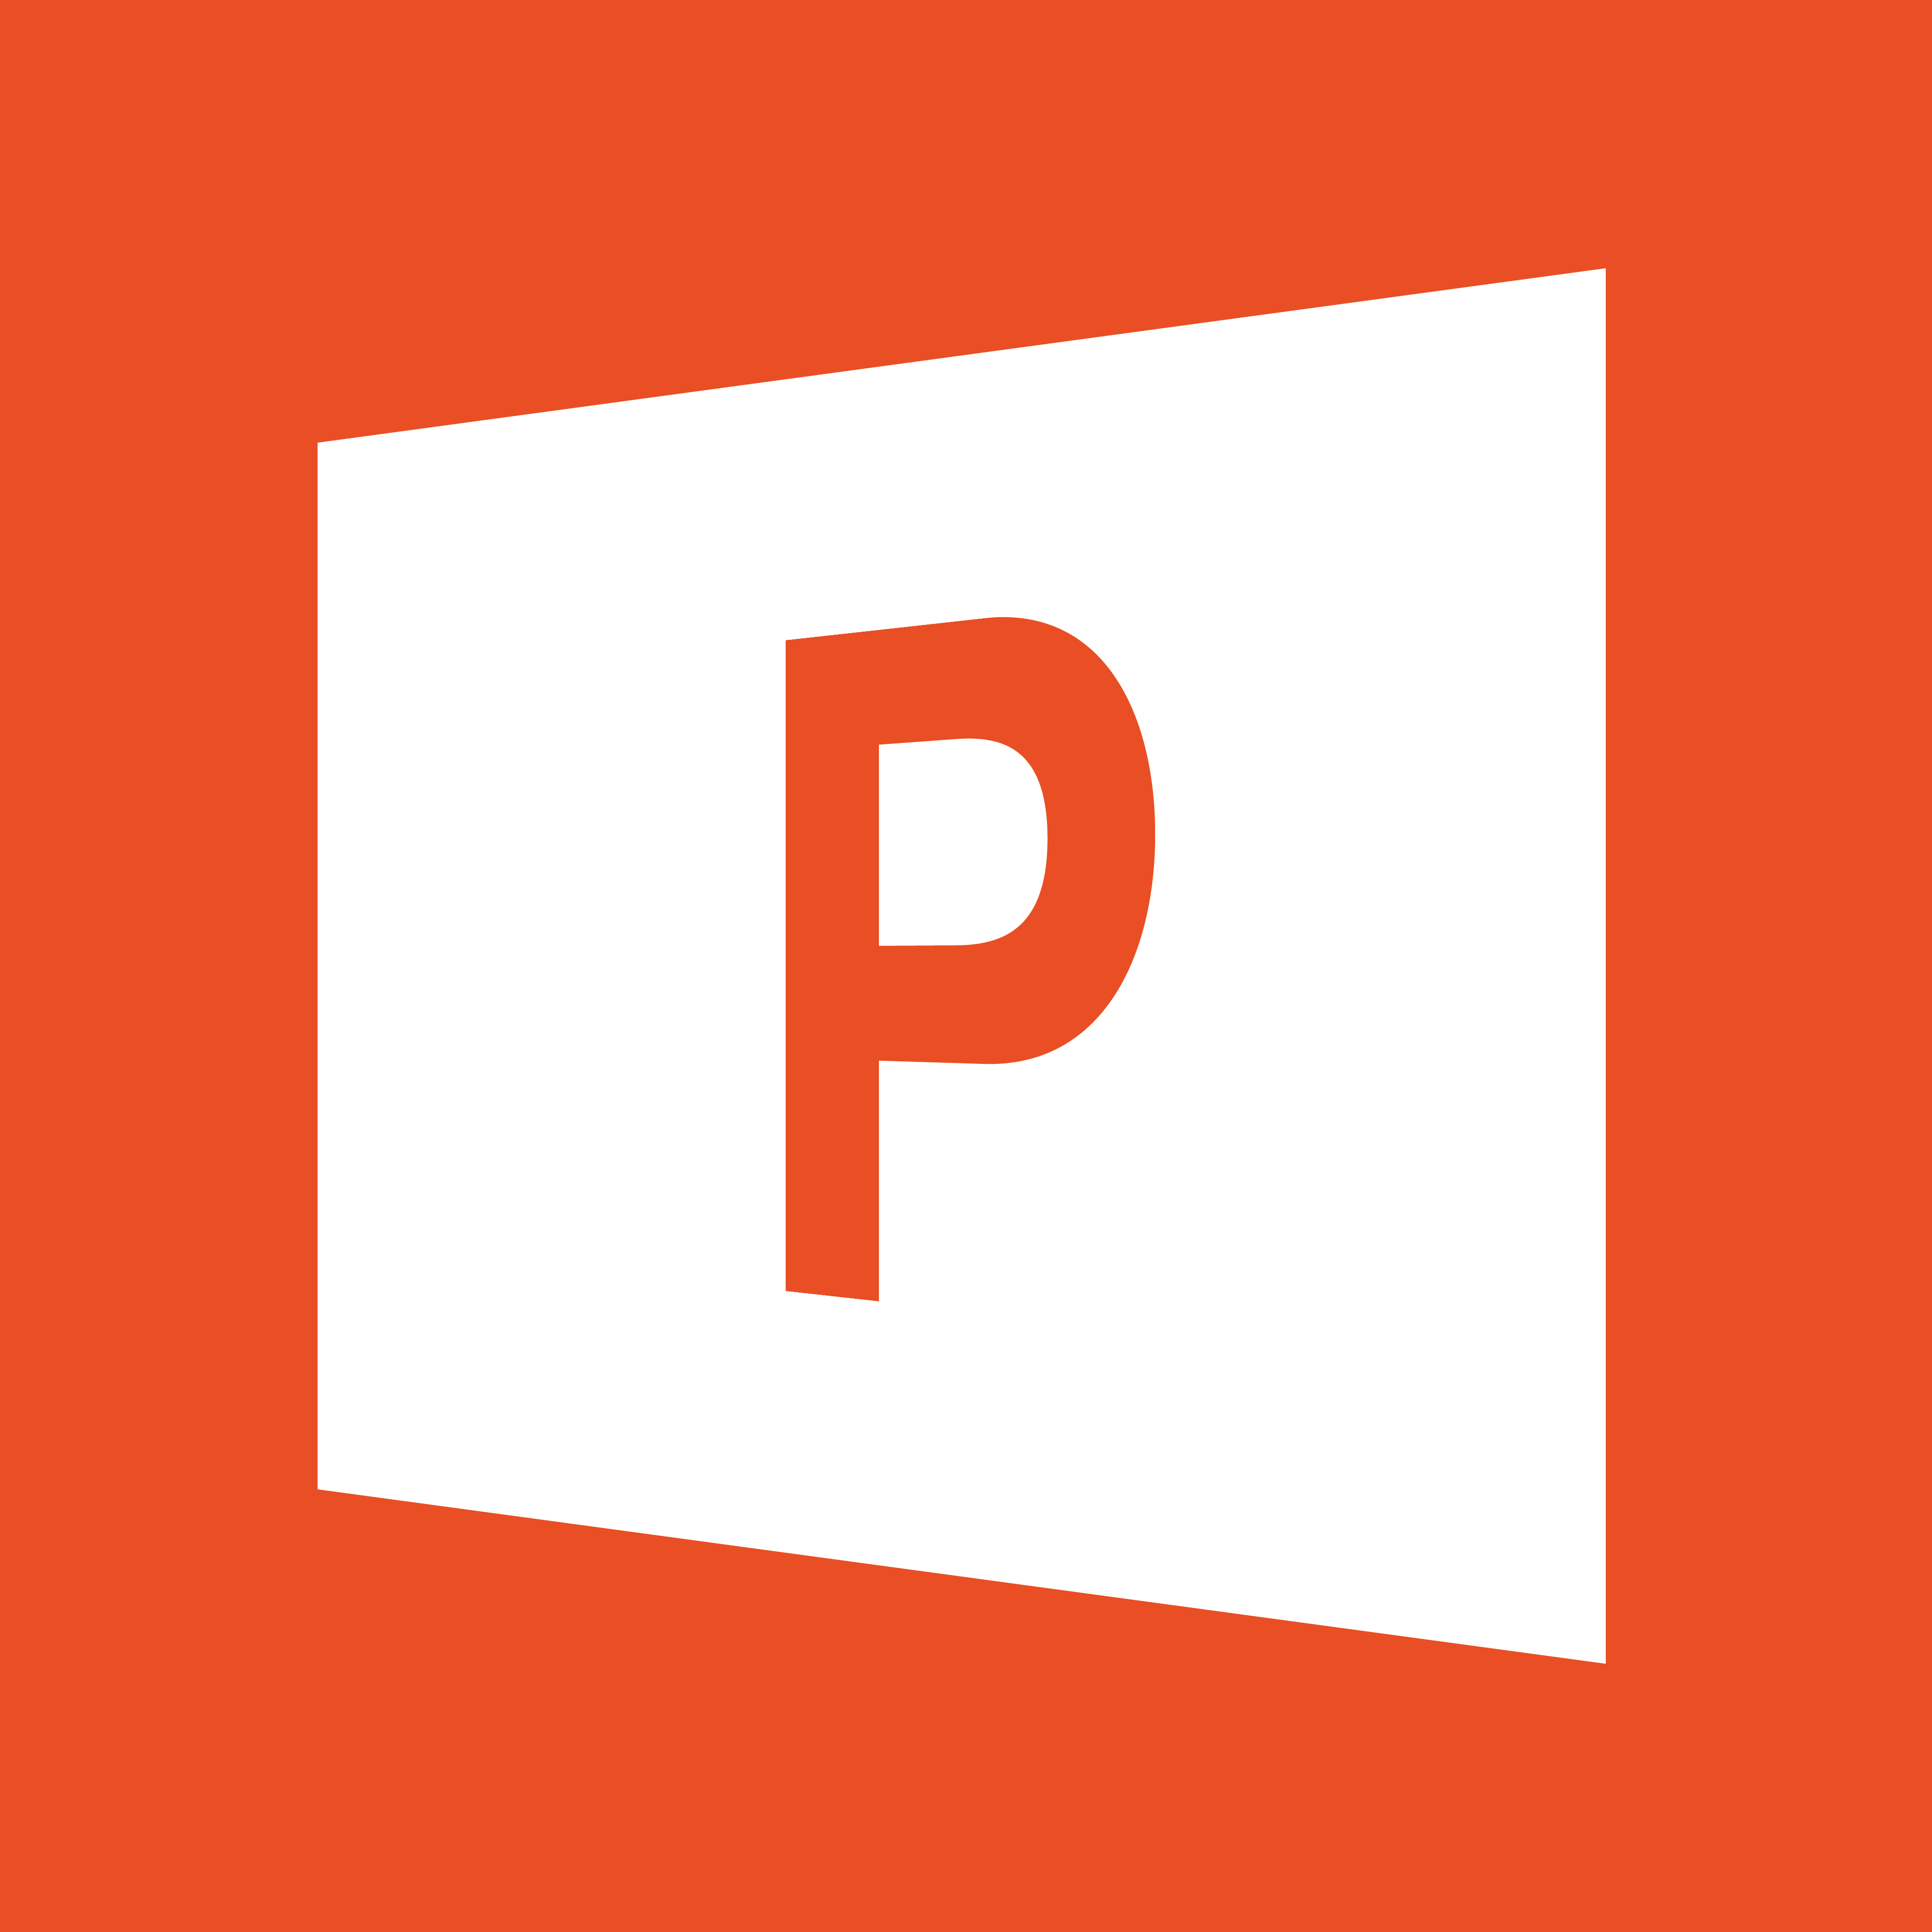 PowerPoint 2016 Logo - Microsoft powerpoint logo 2016 png PNG Image